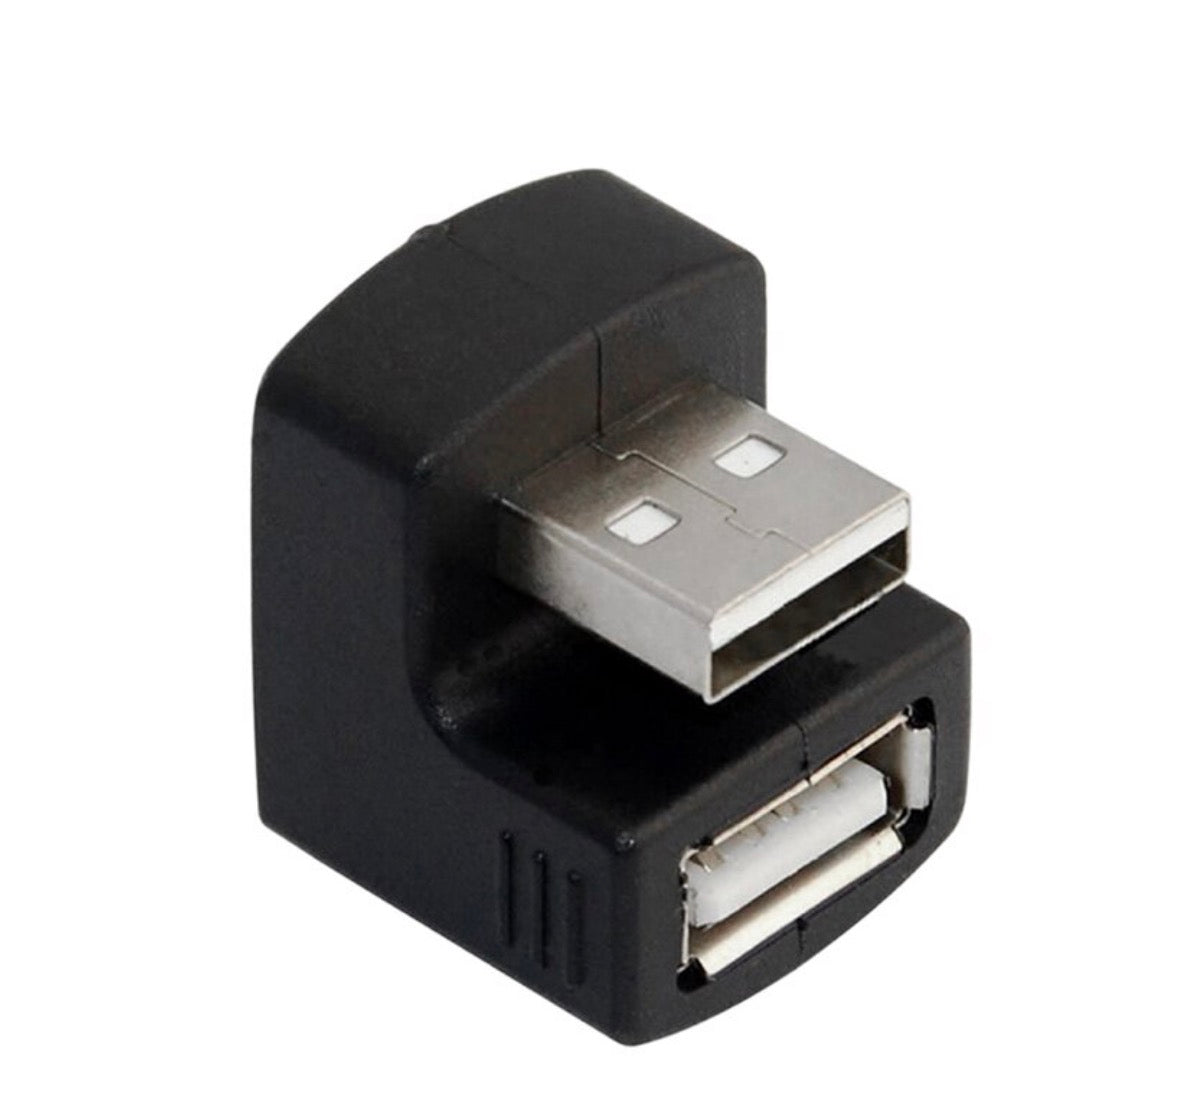 USB 2.0 Type A Male to Female Extension Connector Adapter